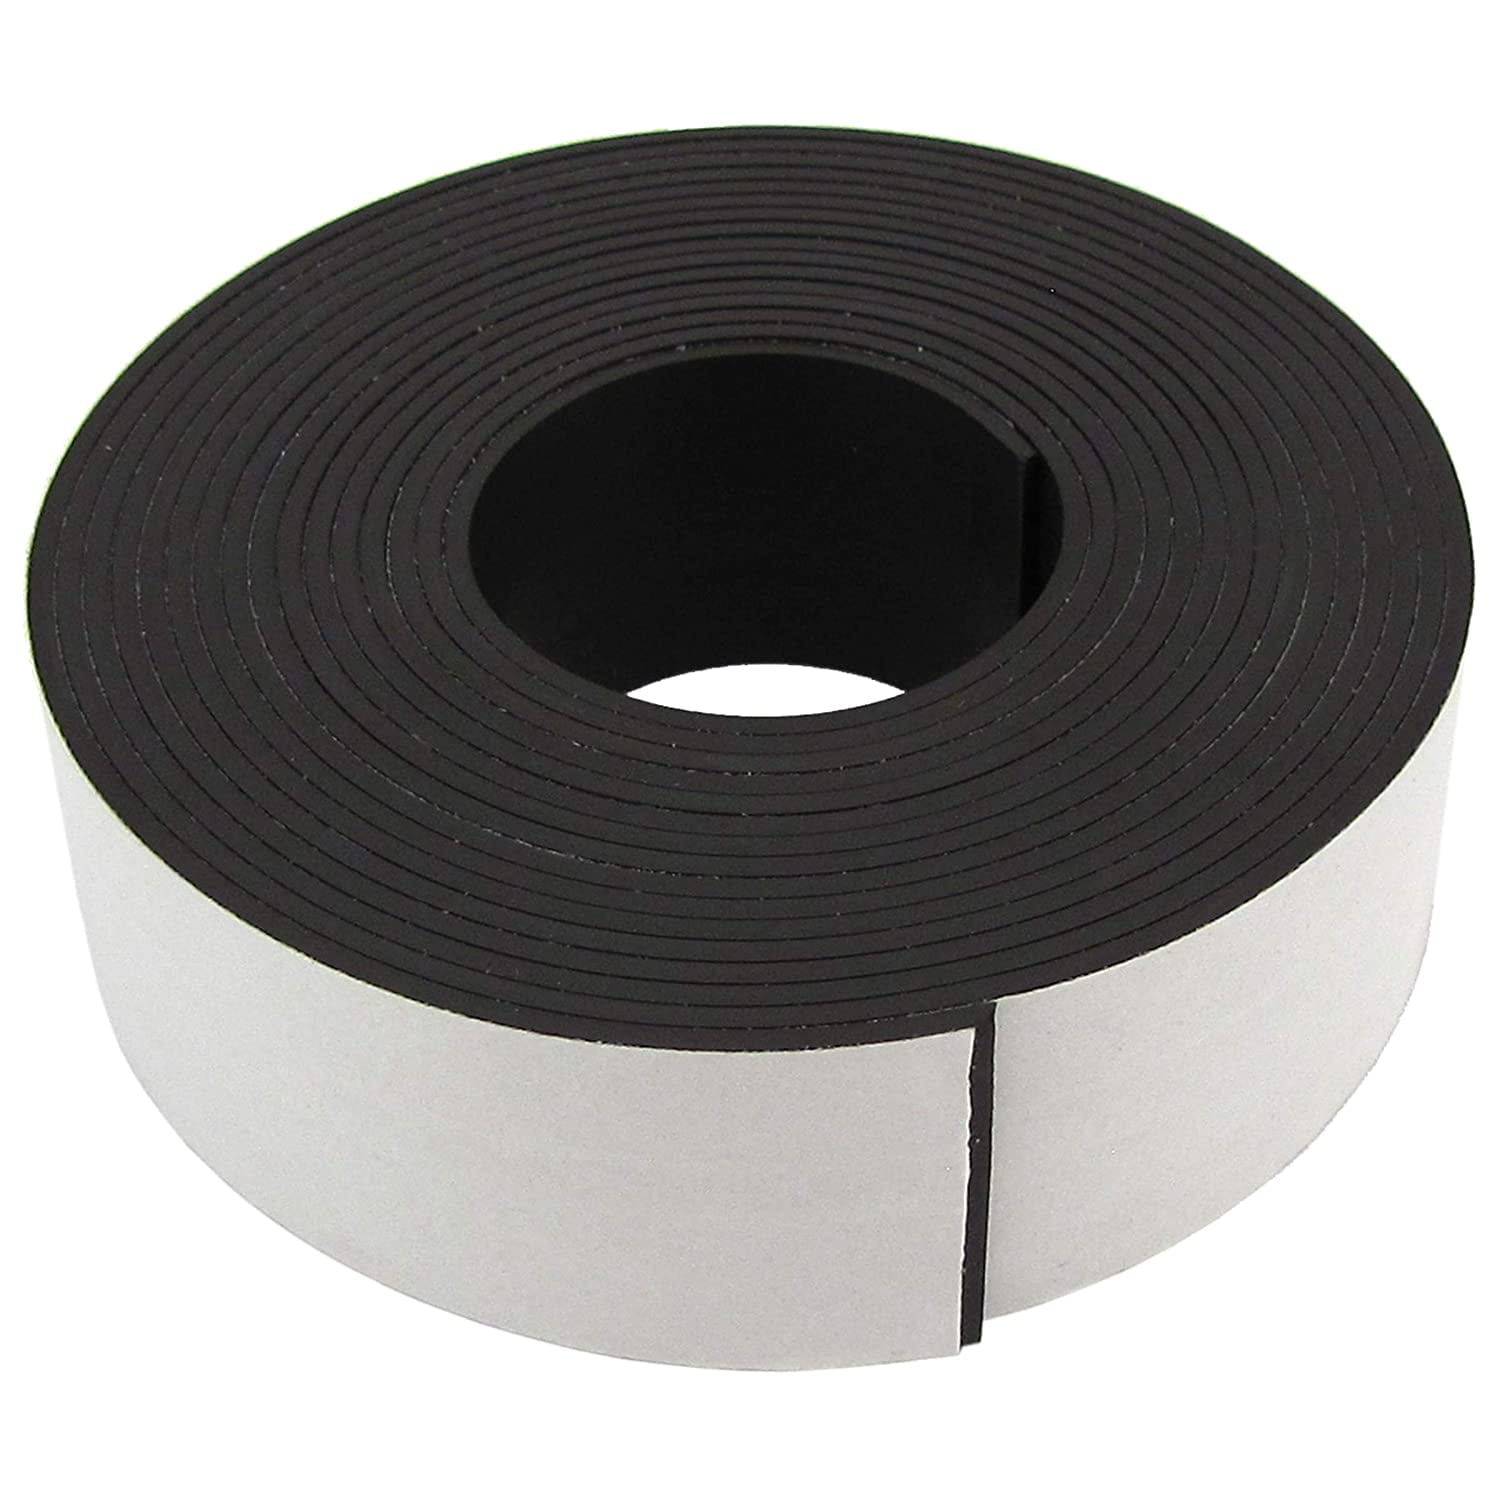 Magnetic Tape Strips with Adhesive Backing - Magnetic Strip Sukh Magnet Band Strong Adhesive Cuttable Magnetic Sheets Magnets Perfect for DIY, Art